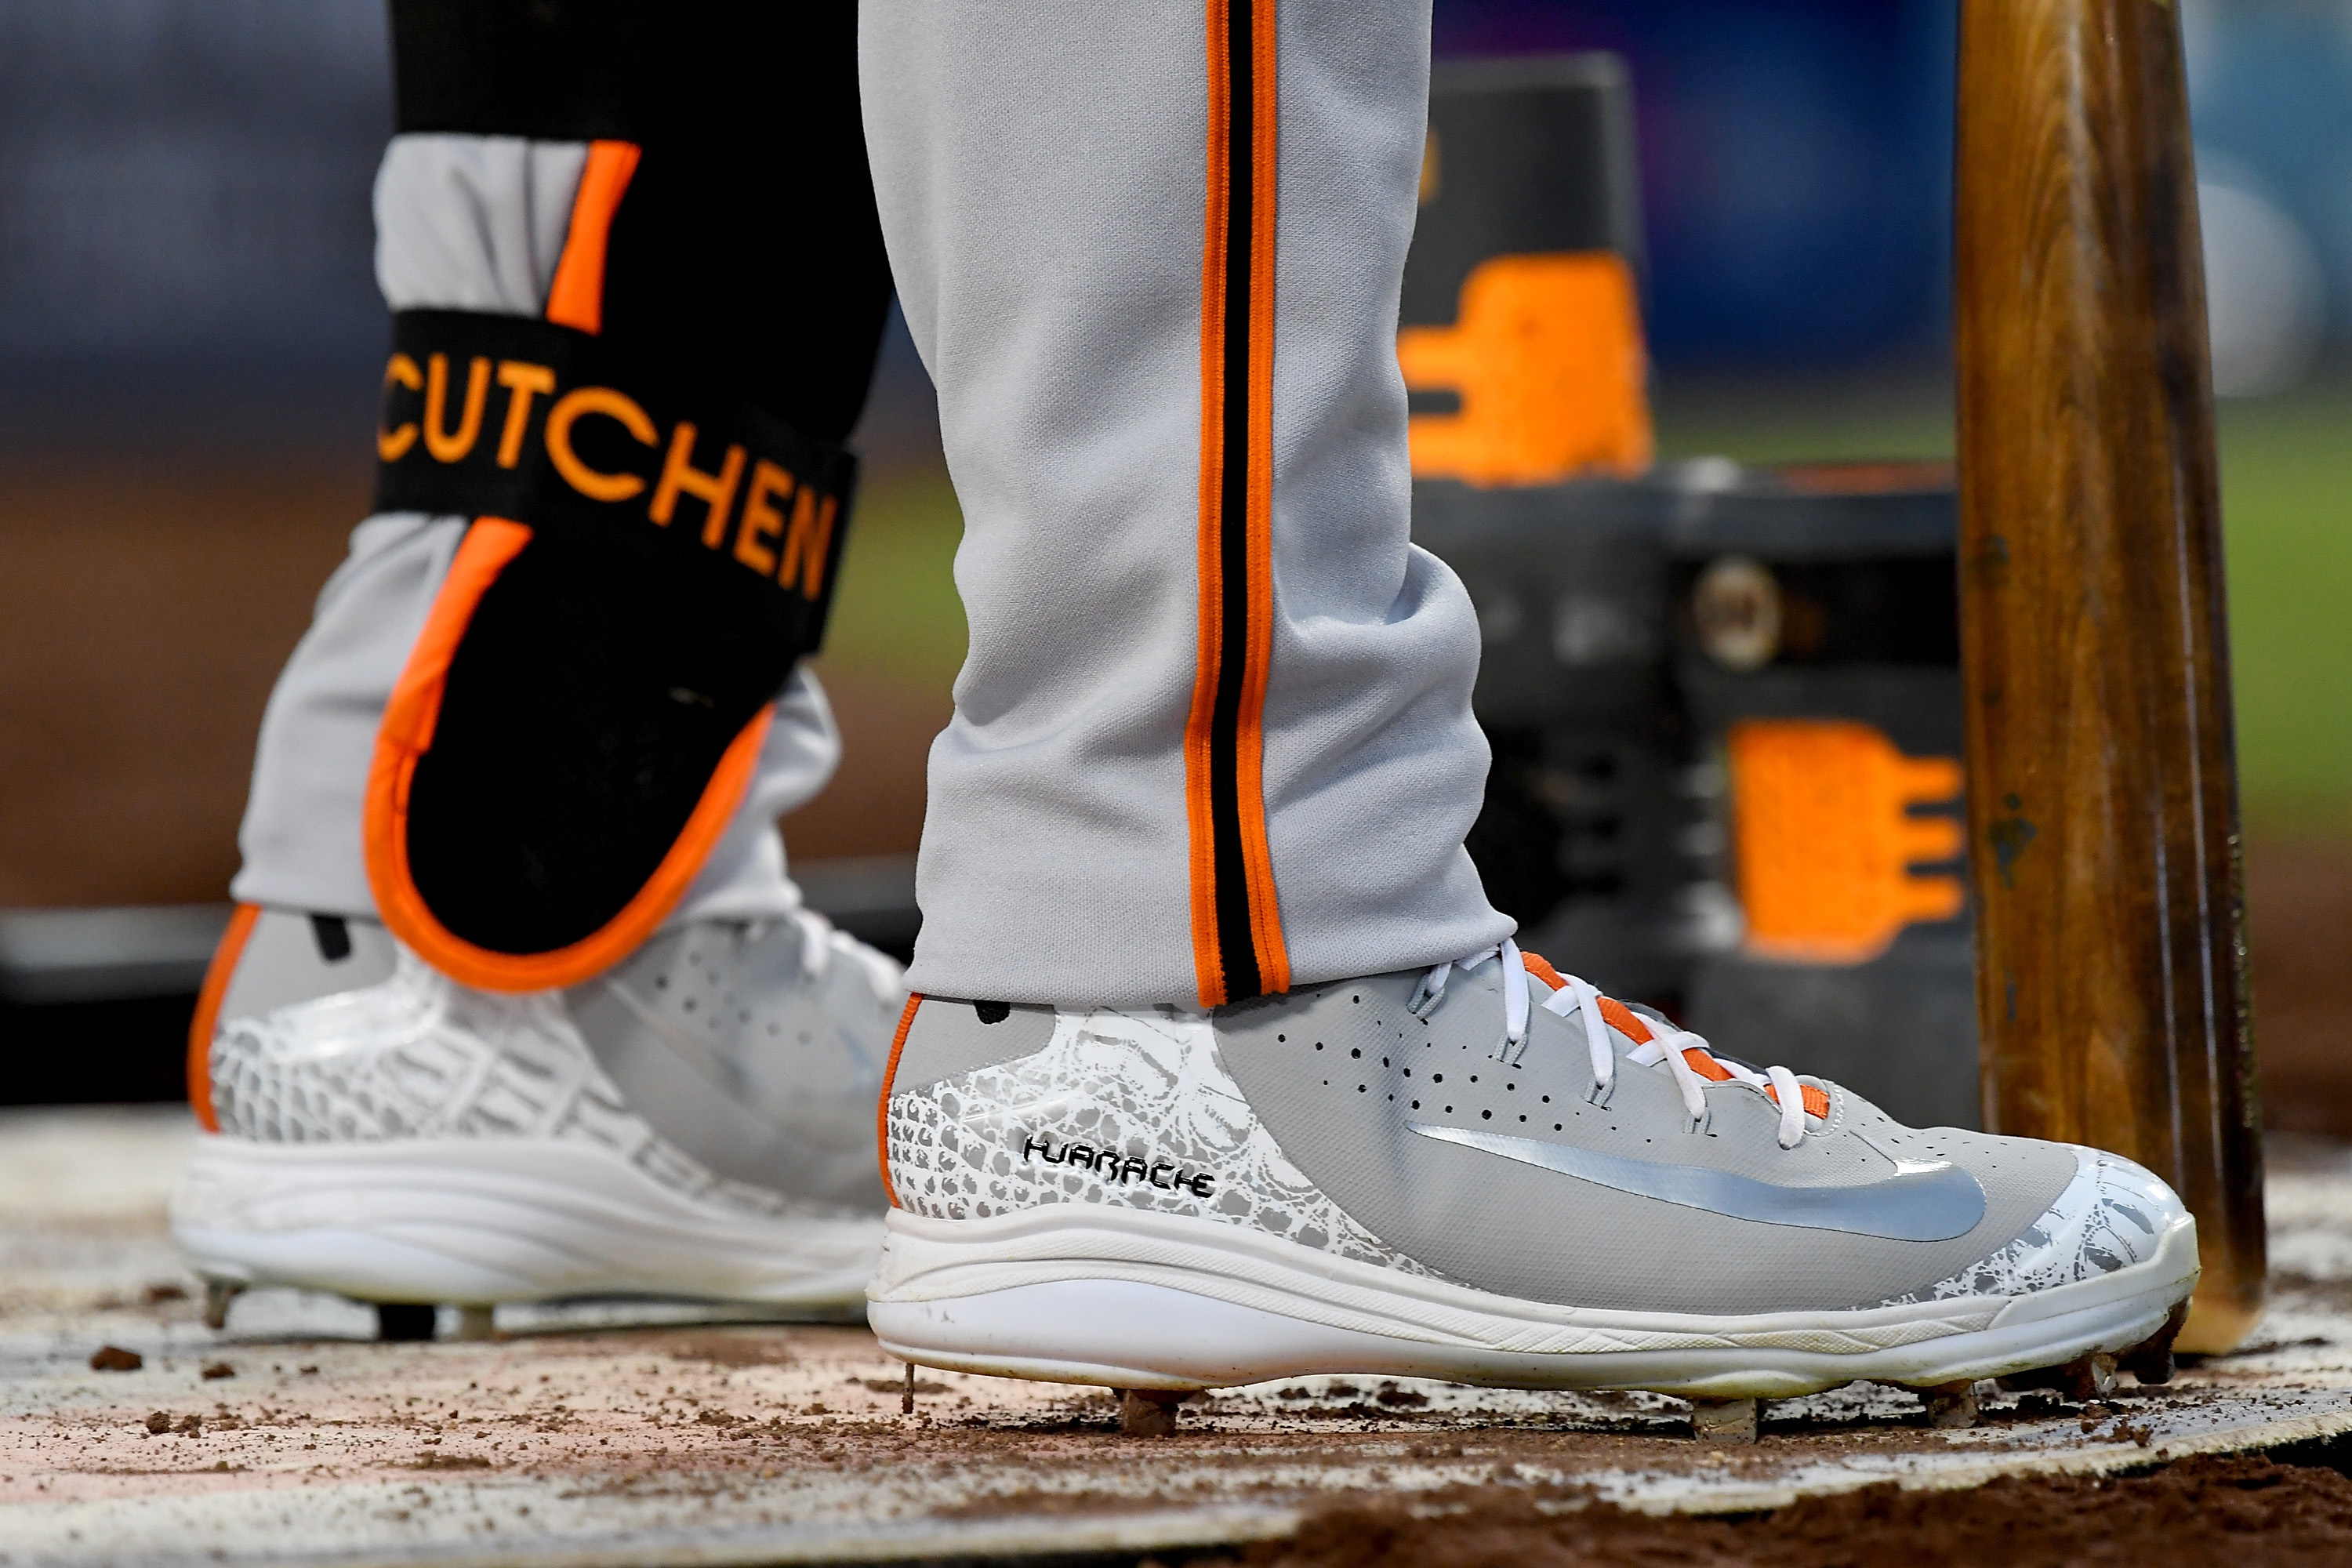 MLB, MLBPA in Discussions to Loosen Footwear Rules Amid Criticism